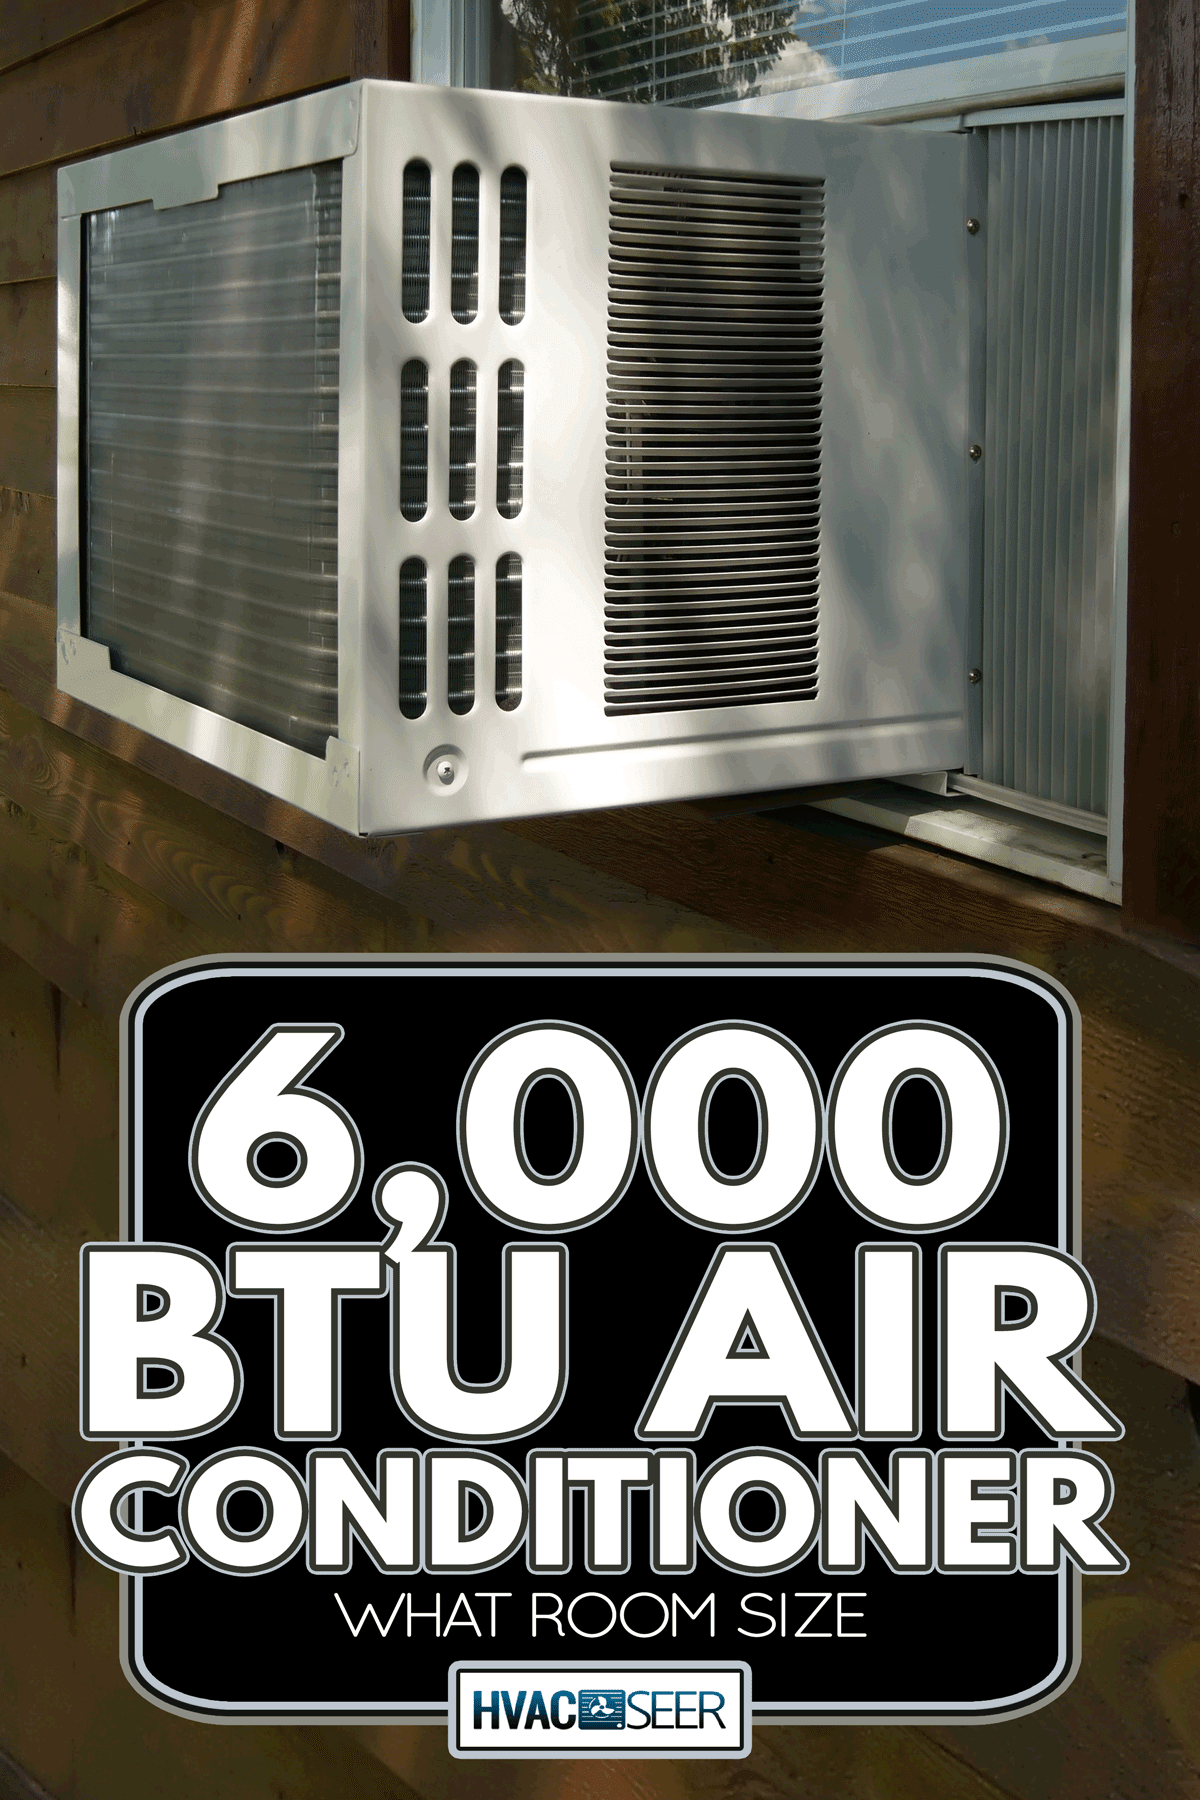 A window type air conditioner in a wooden house, 6,000 BTU Air Conditioner - What Room Size?